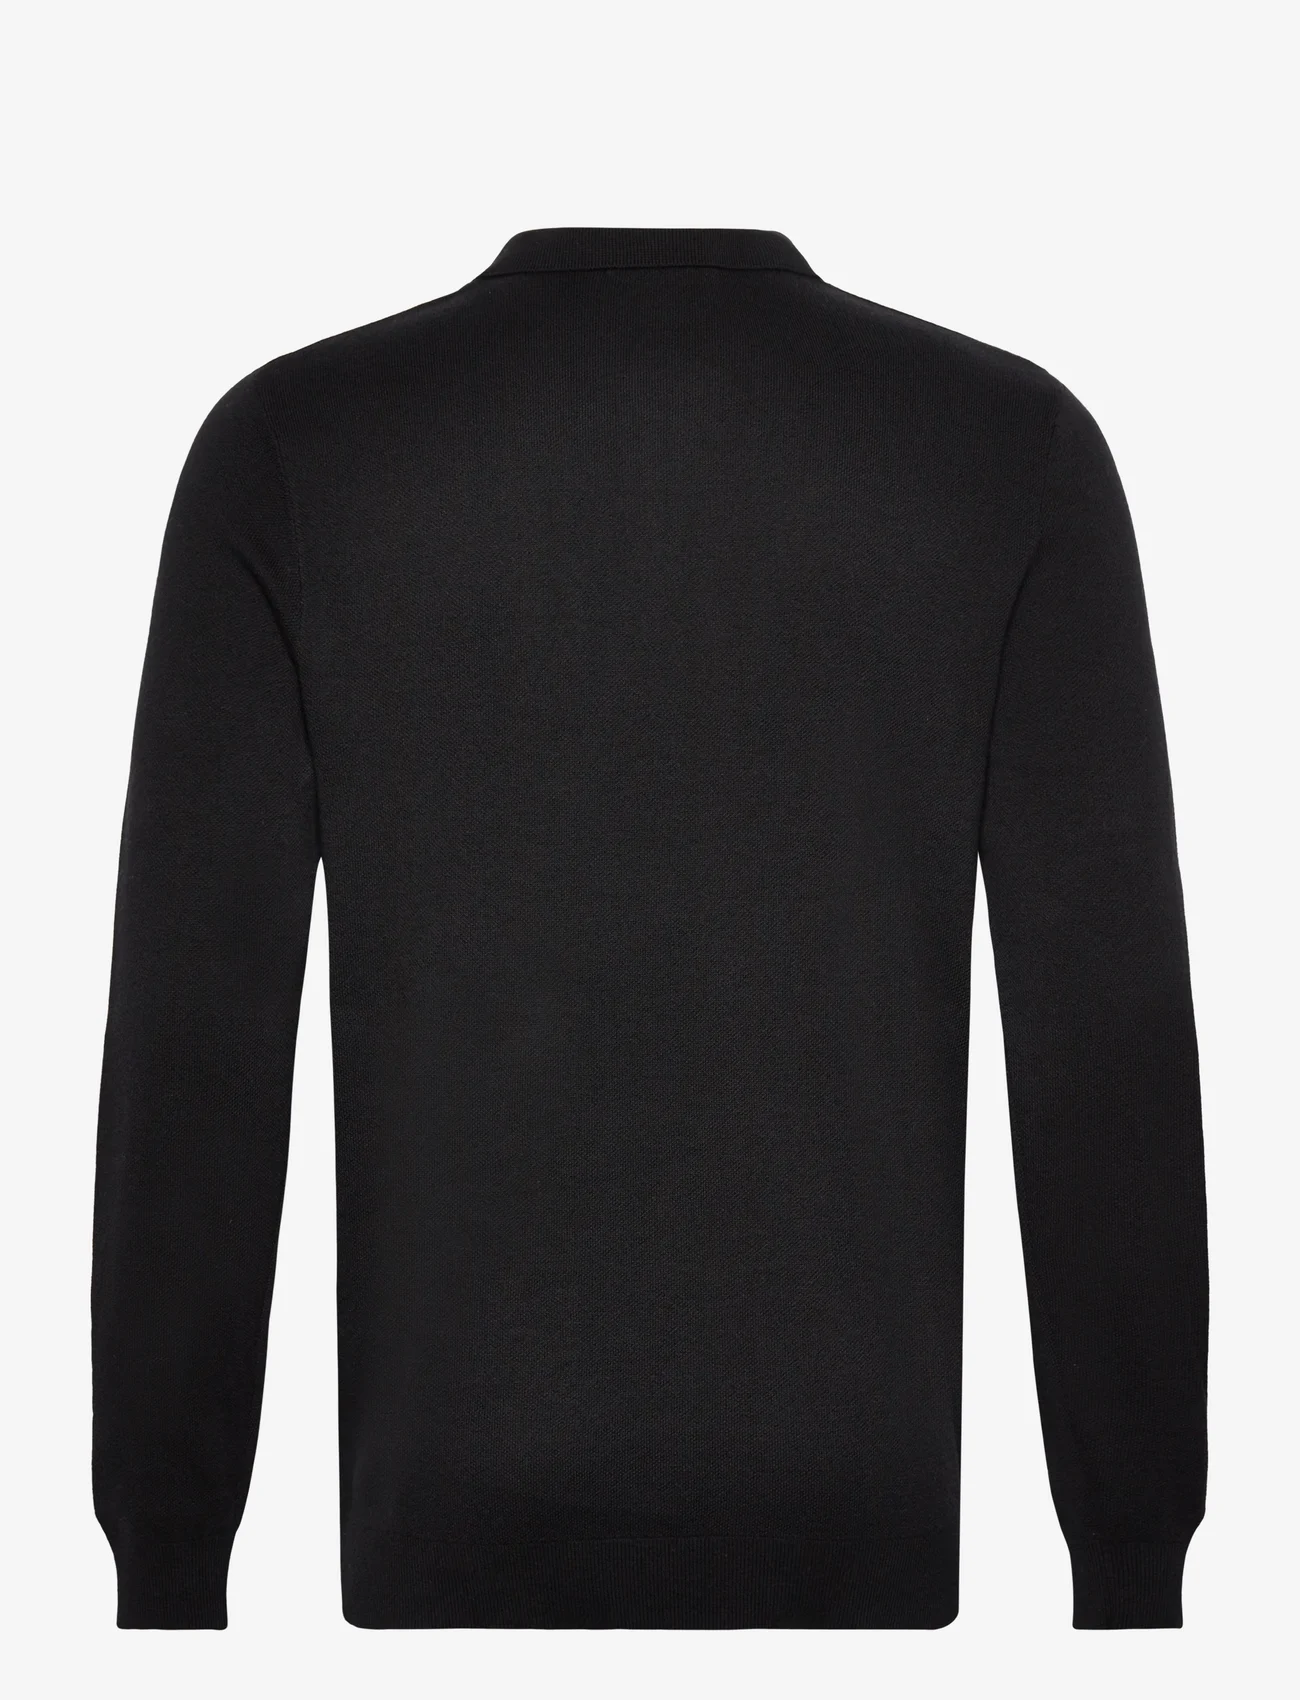 Selected Homme - SLHFLORENCE LS KNIT ZIP POLO EX - gestrickte polohemden - black - 1